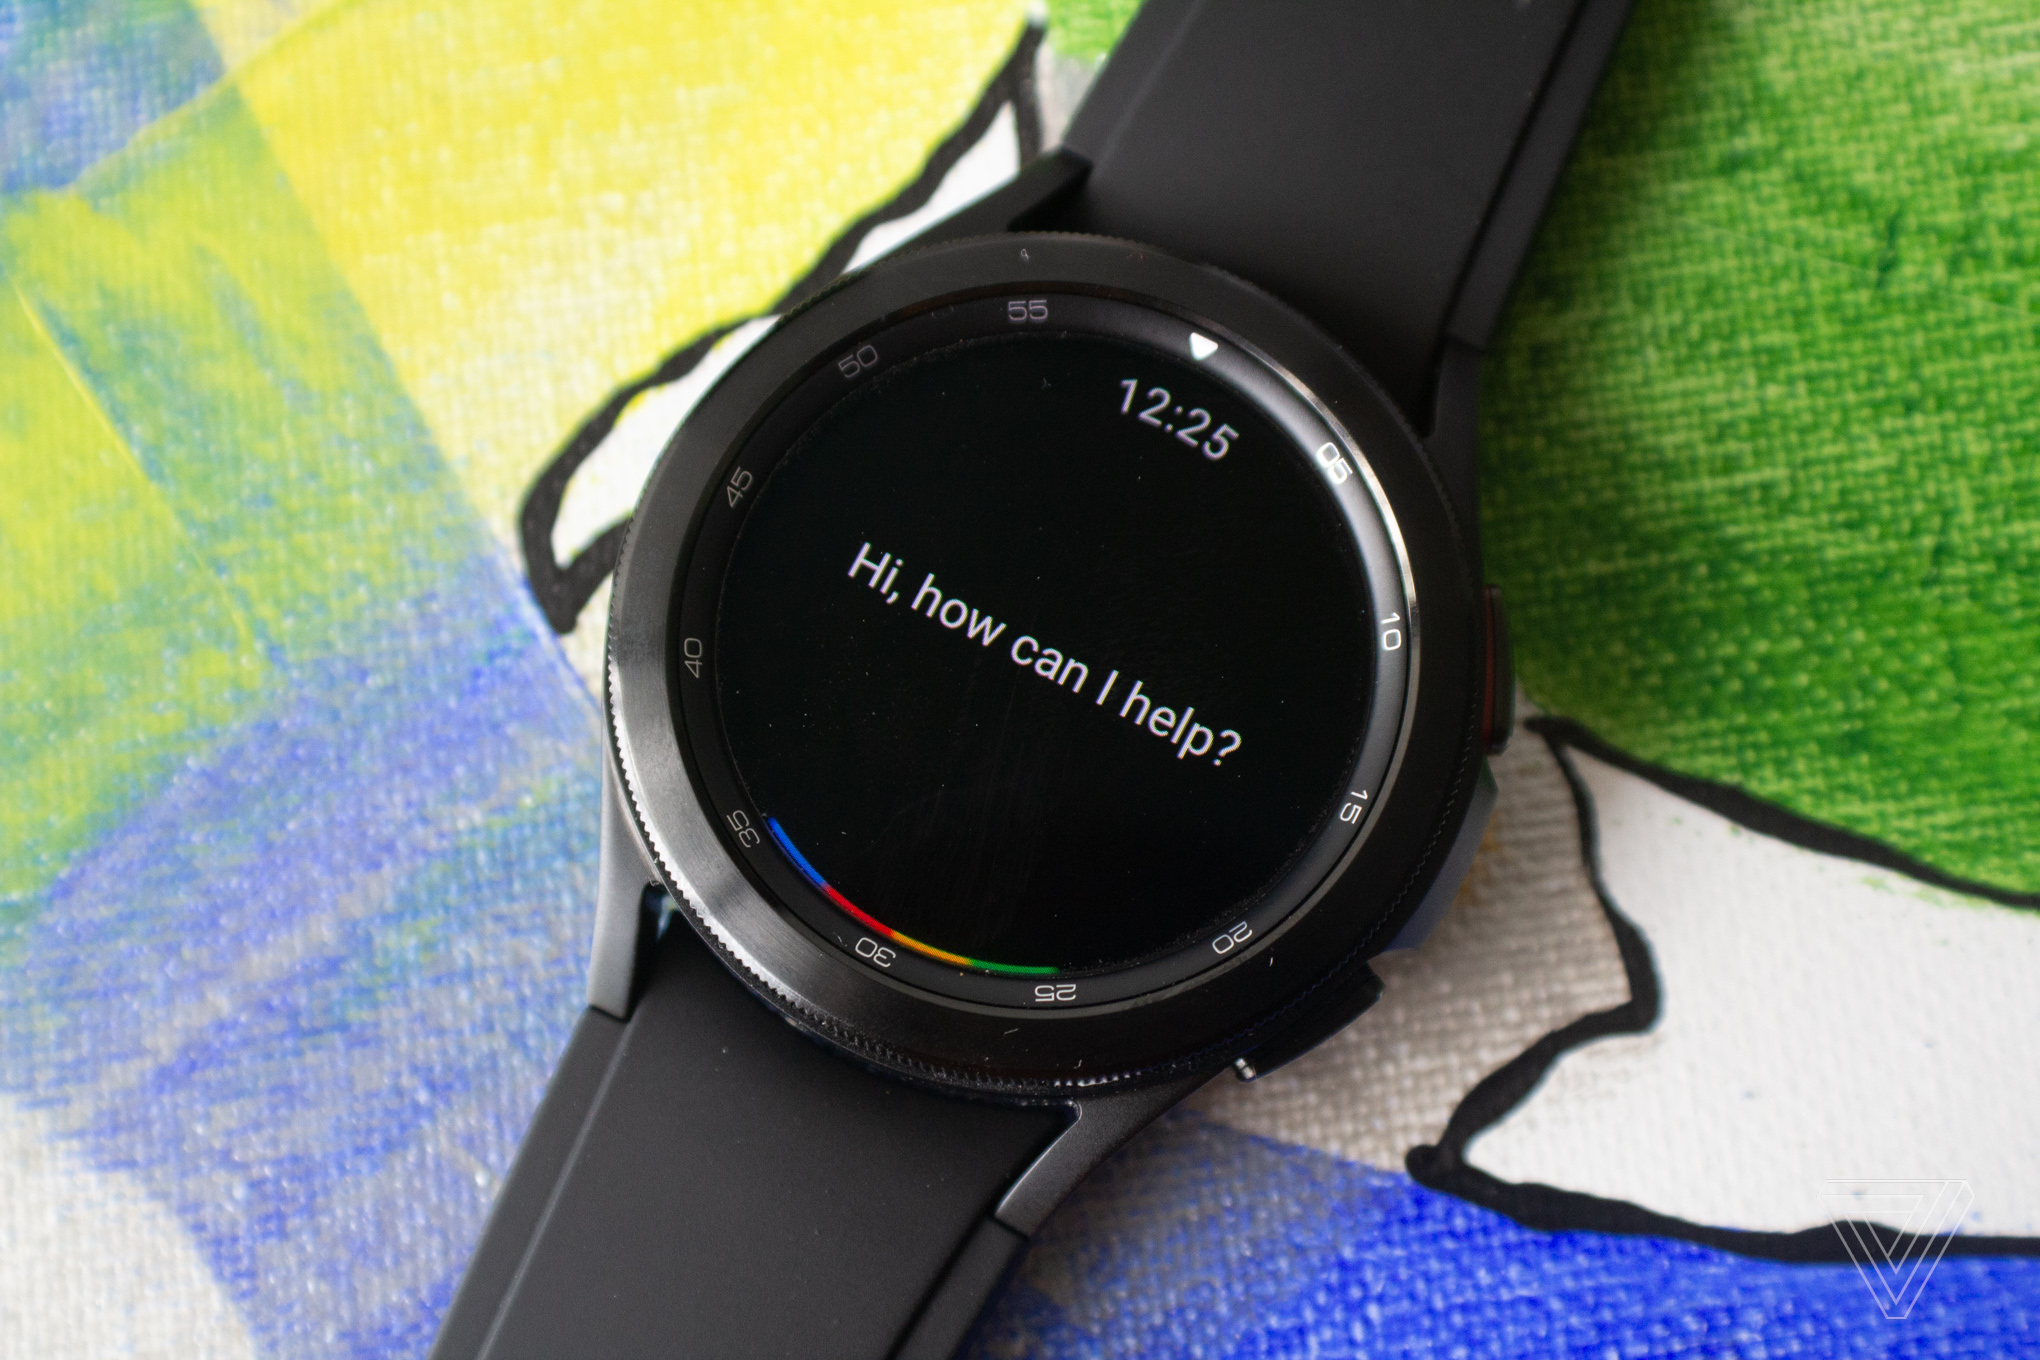 Google Assistant on the Samsung Galaxy Watch 4